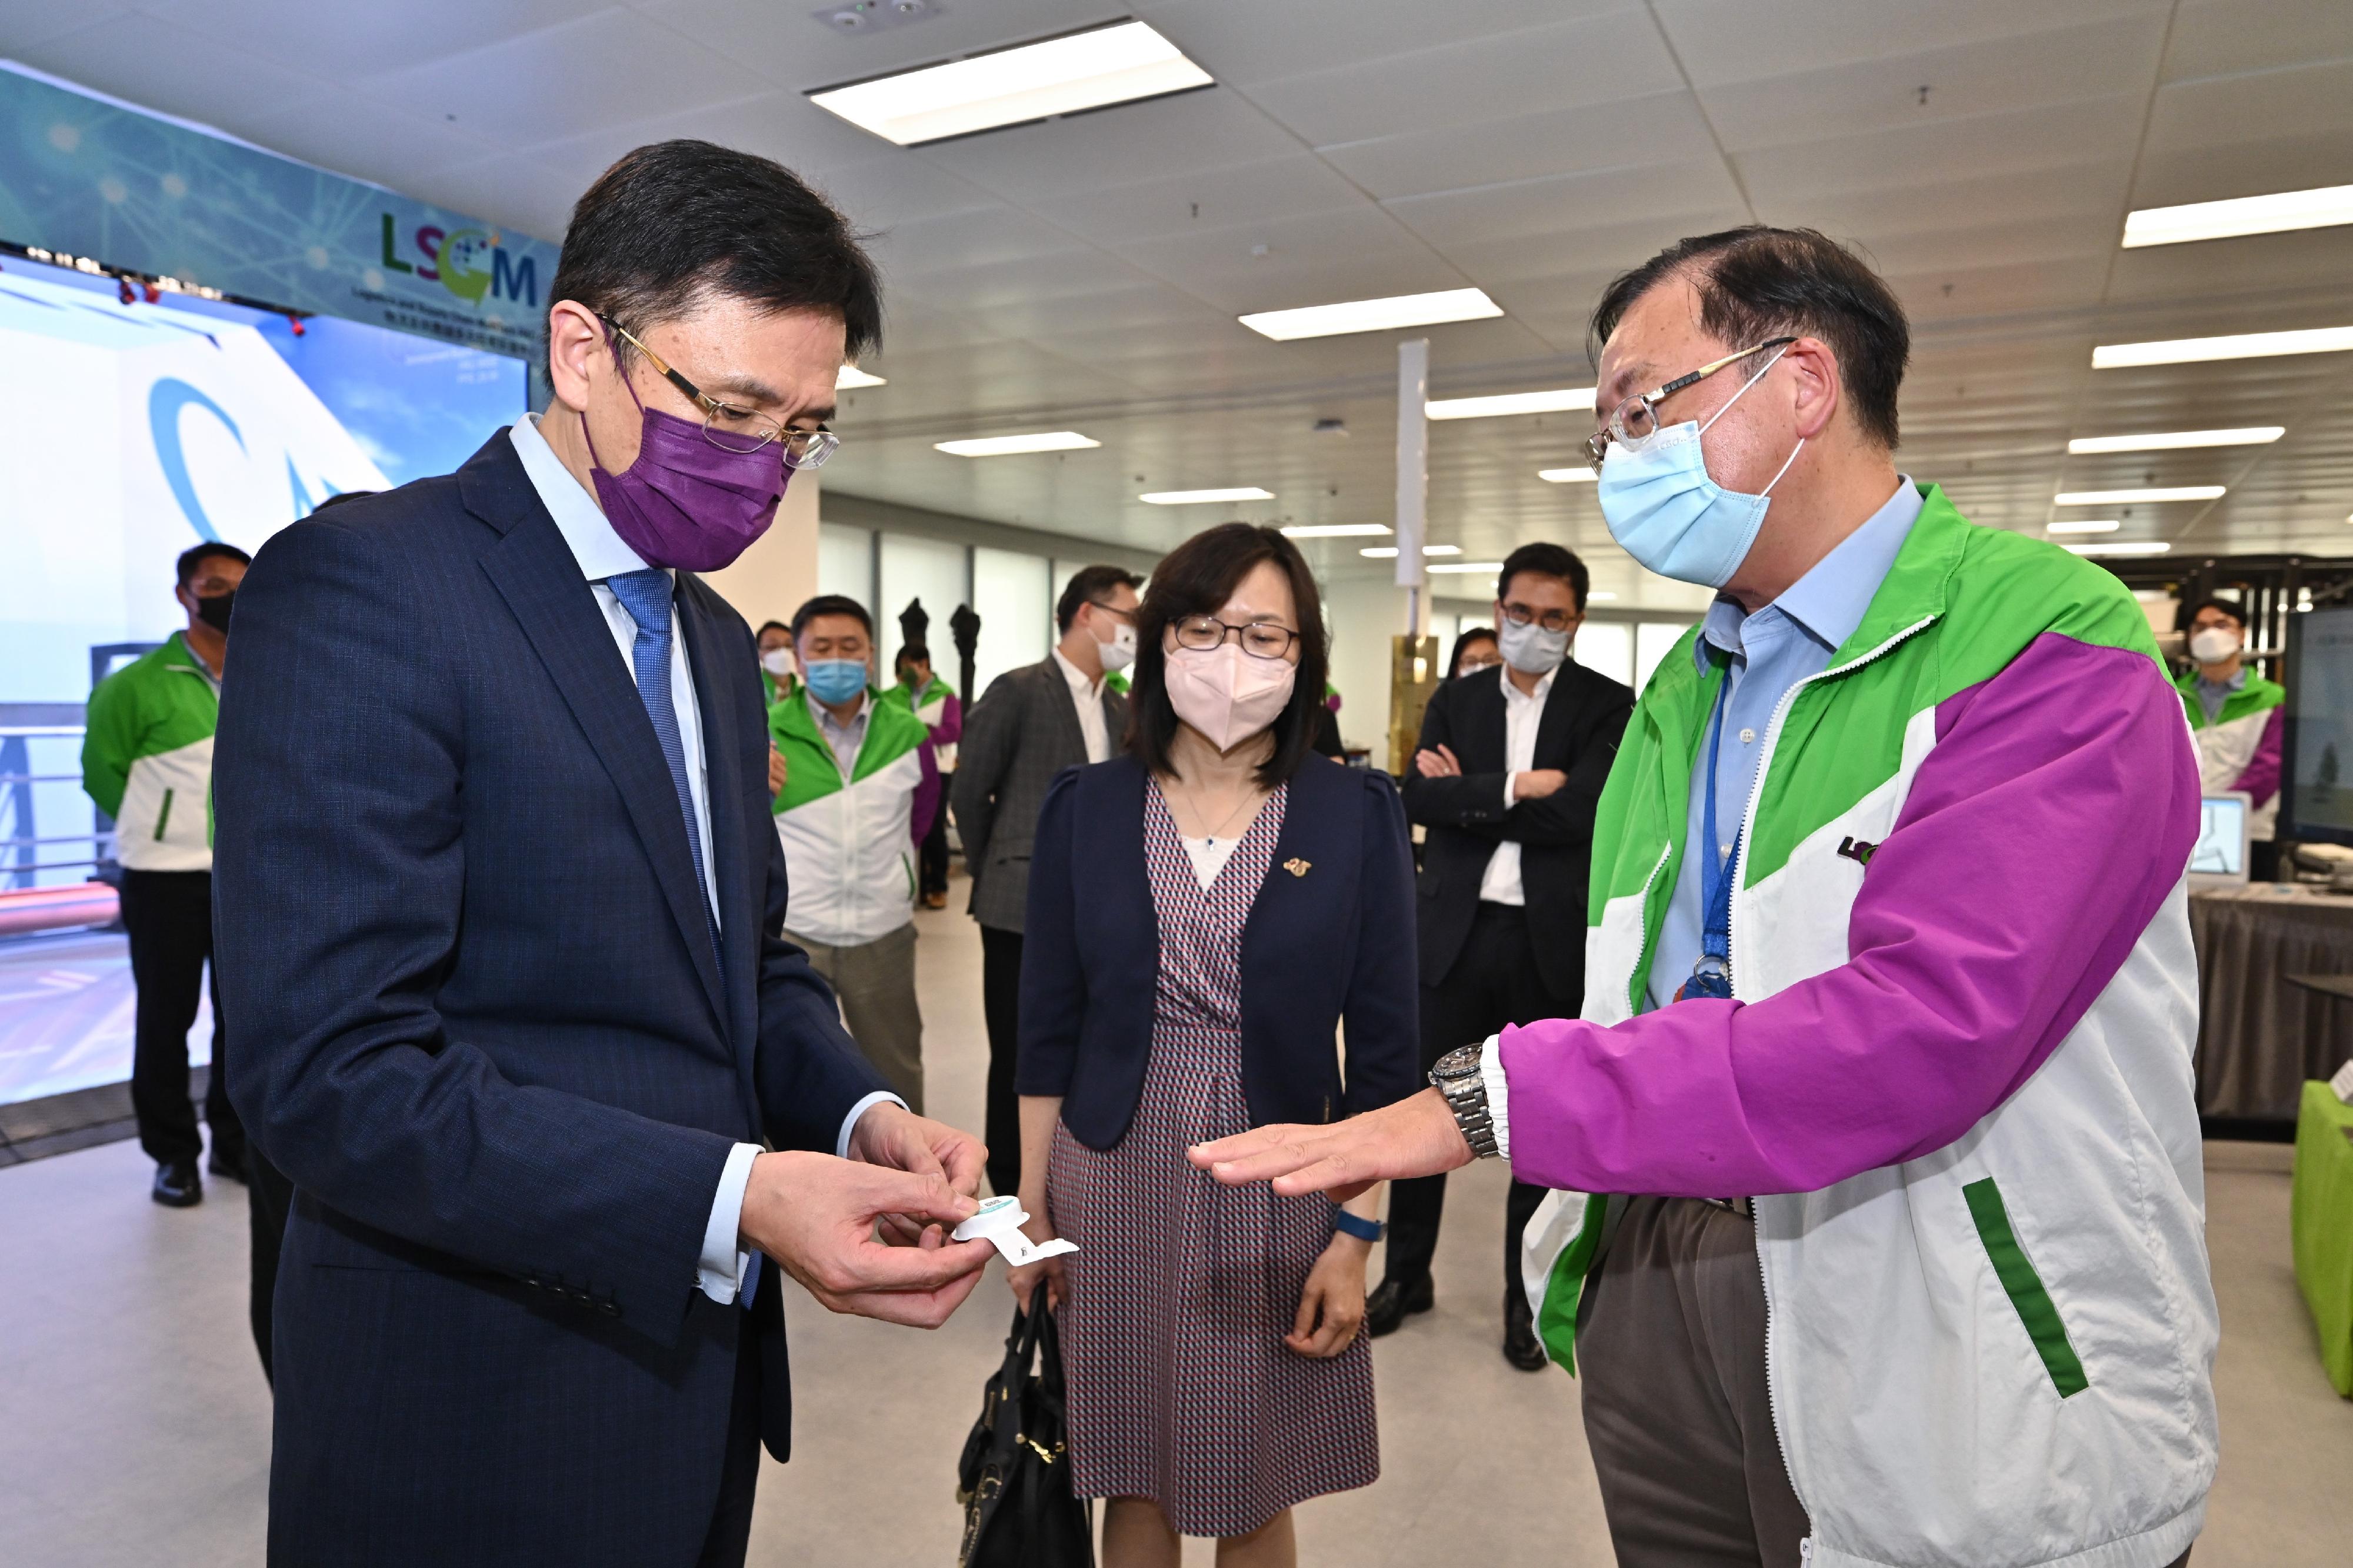 The Secretary for Innovation, Technology and Industry, Professor Sun Dong (left), visits the Logistics and Supply Chain MultiTech R&D Centre (LSCM) today (July 19) and receives a briefing by the Chief Executive Officer of the LSCM, Mr Simon Wong (right) on the "StayHomeSafe" electronic wristband and monitoring system. Looking on is the Commissioner for Innovation and Technology, Ms Rebecca Pun (centre).